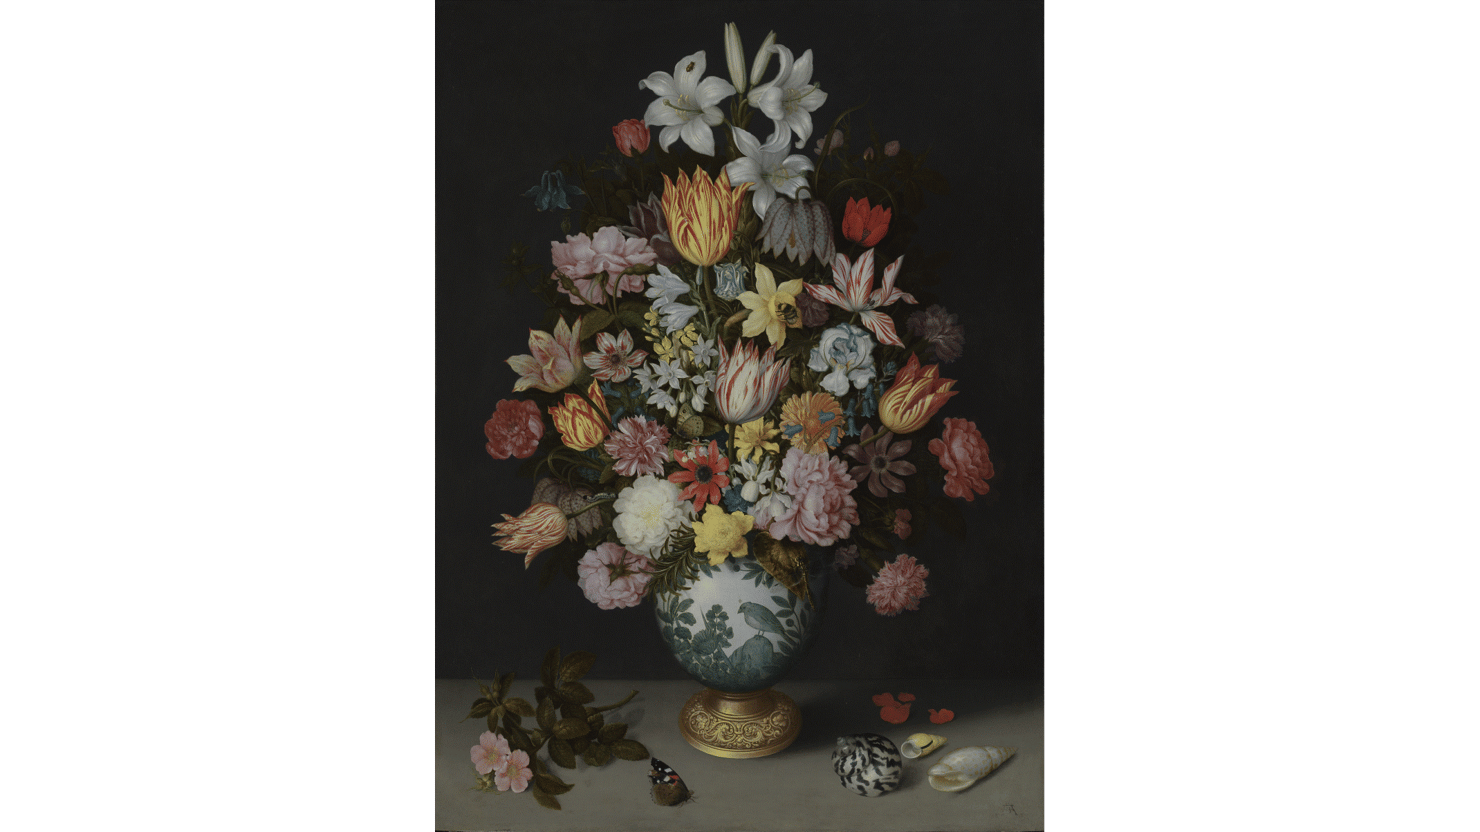 A Still Life of Flowers in a Wan-Li Vase on a Ledge with further Flowers, Shells and a Butterfly